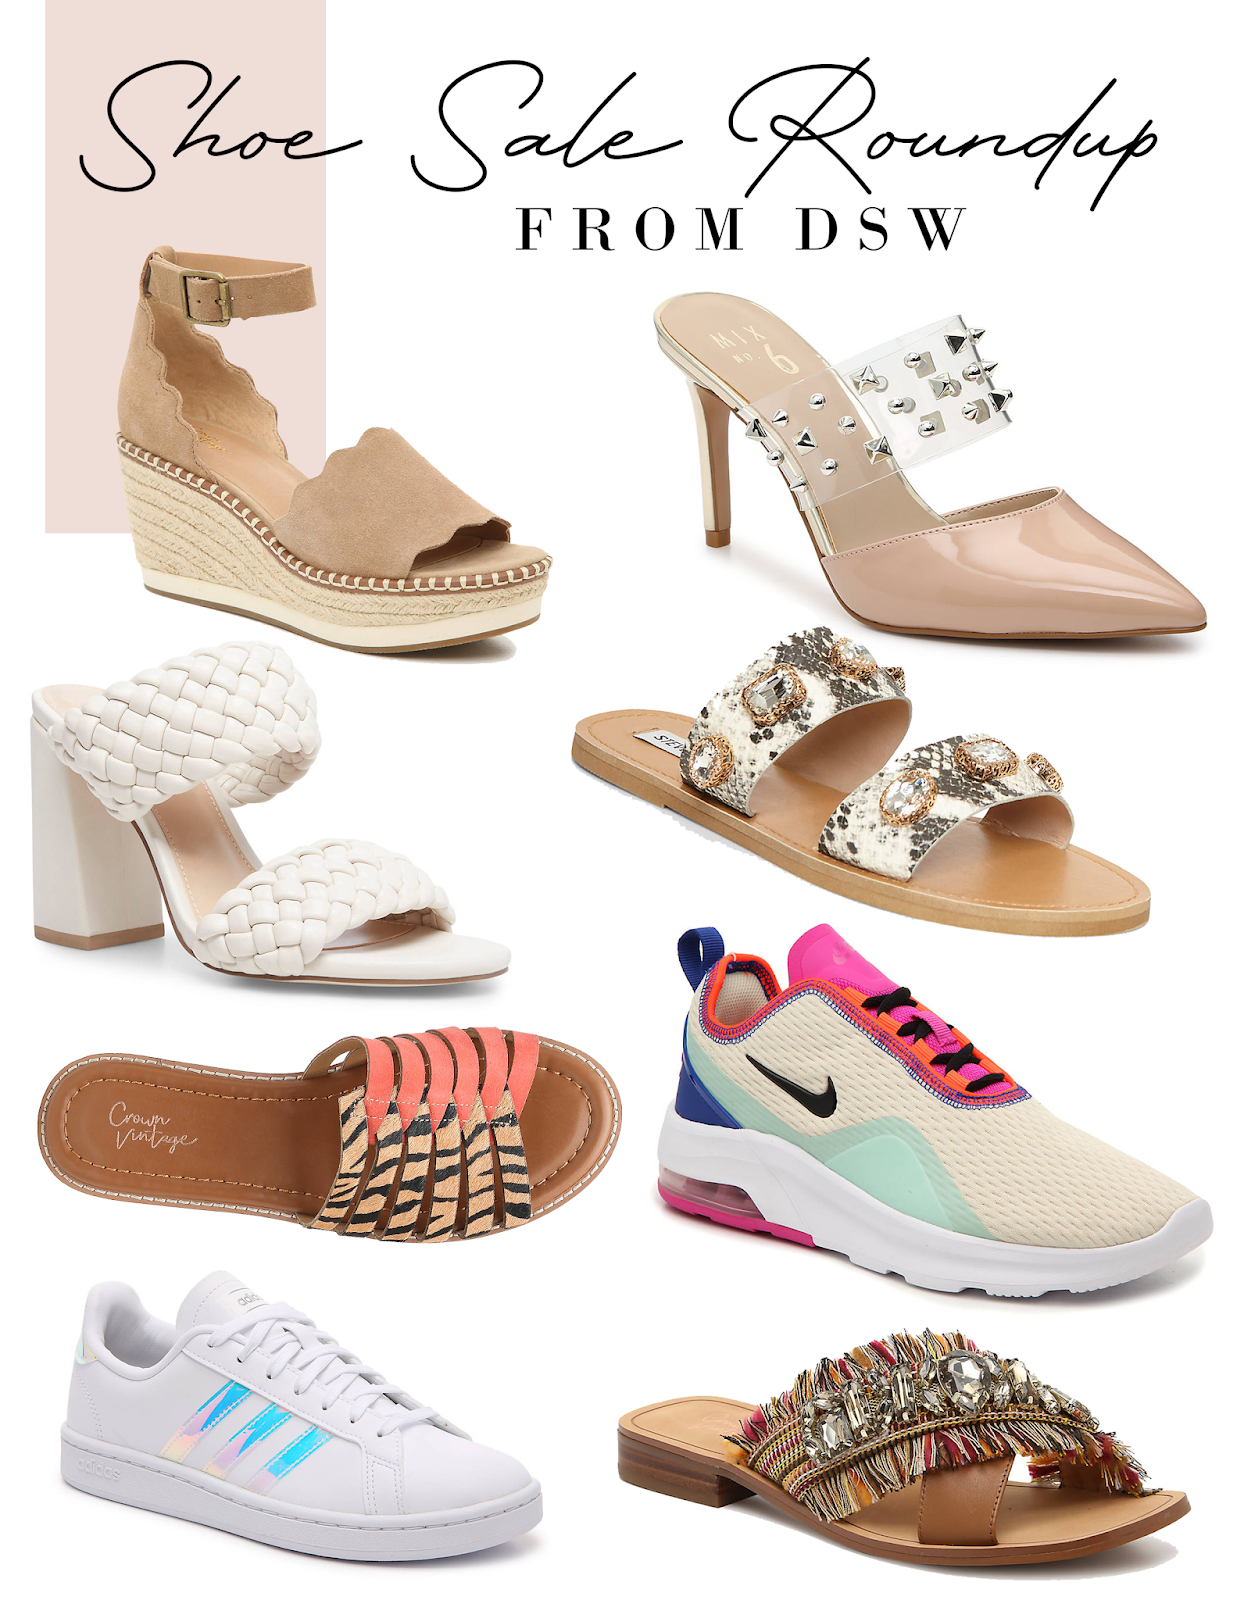 dsw spring shoes 2020